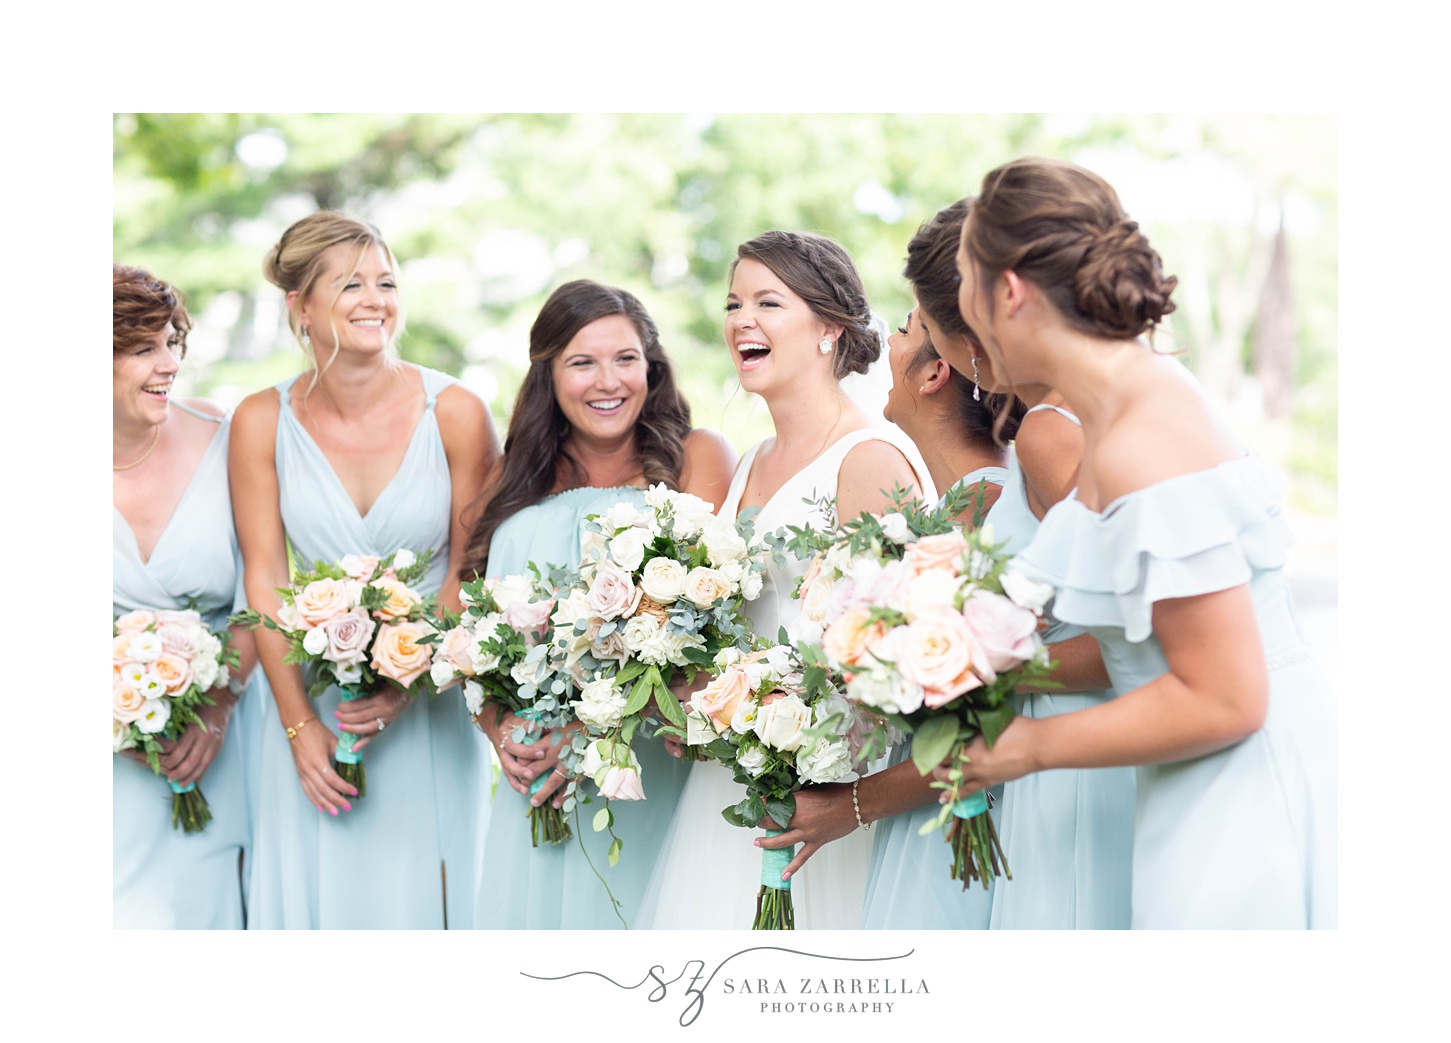 bride laughs with bridesmaids in blue gowns